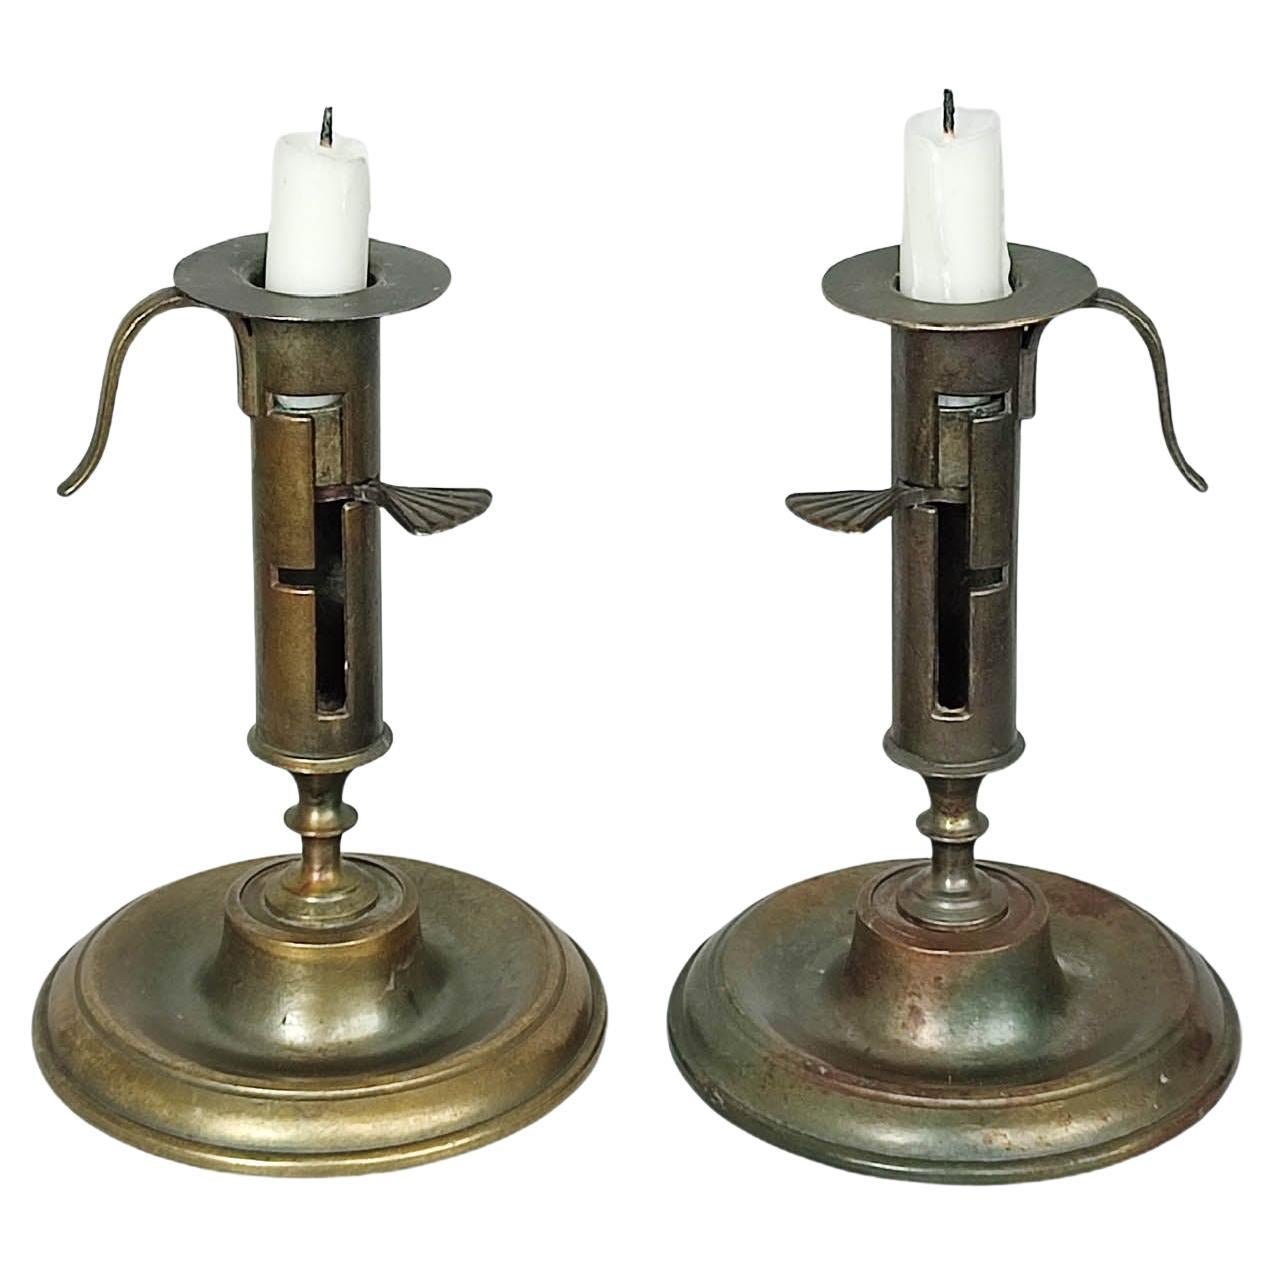 Antique Brass Adjustable Push Up Pair of Candleholders, 19th Century For Sale